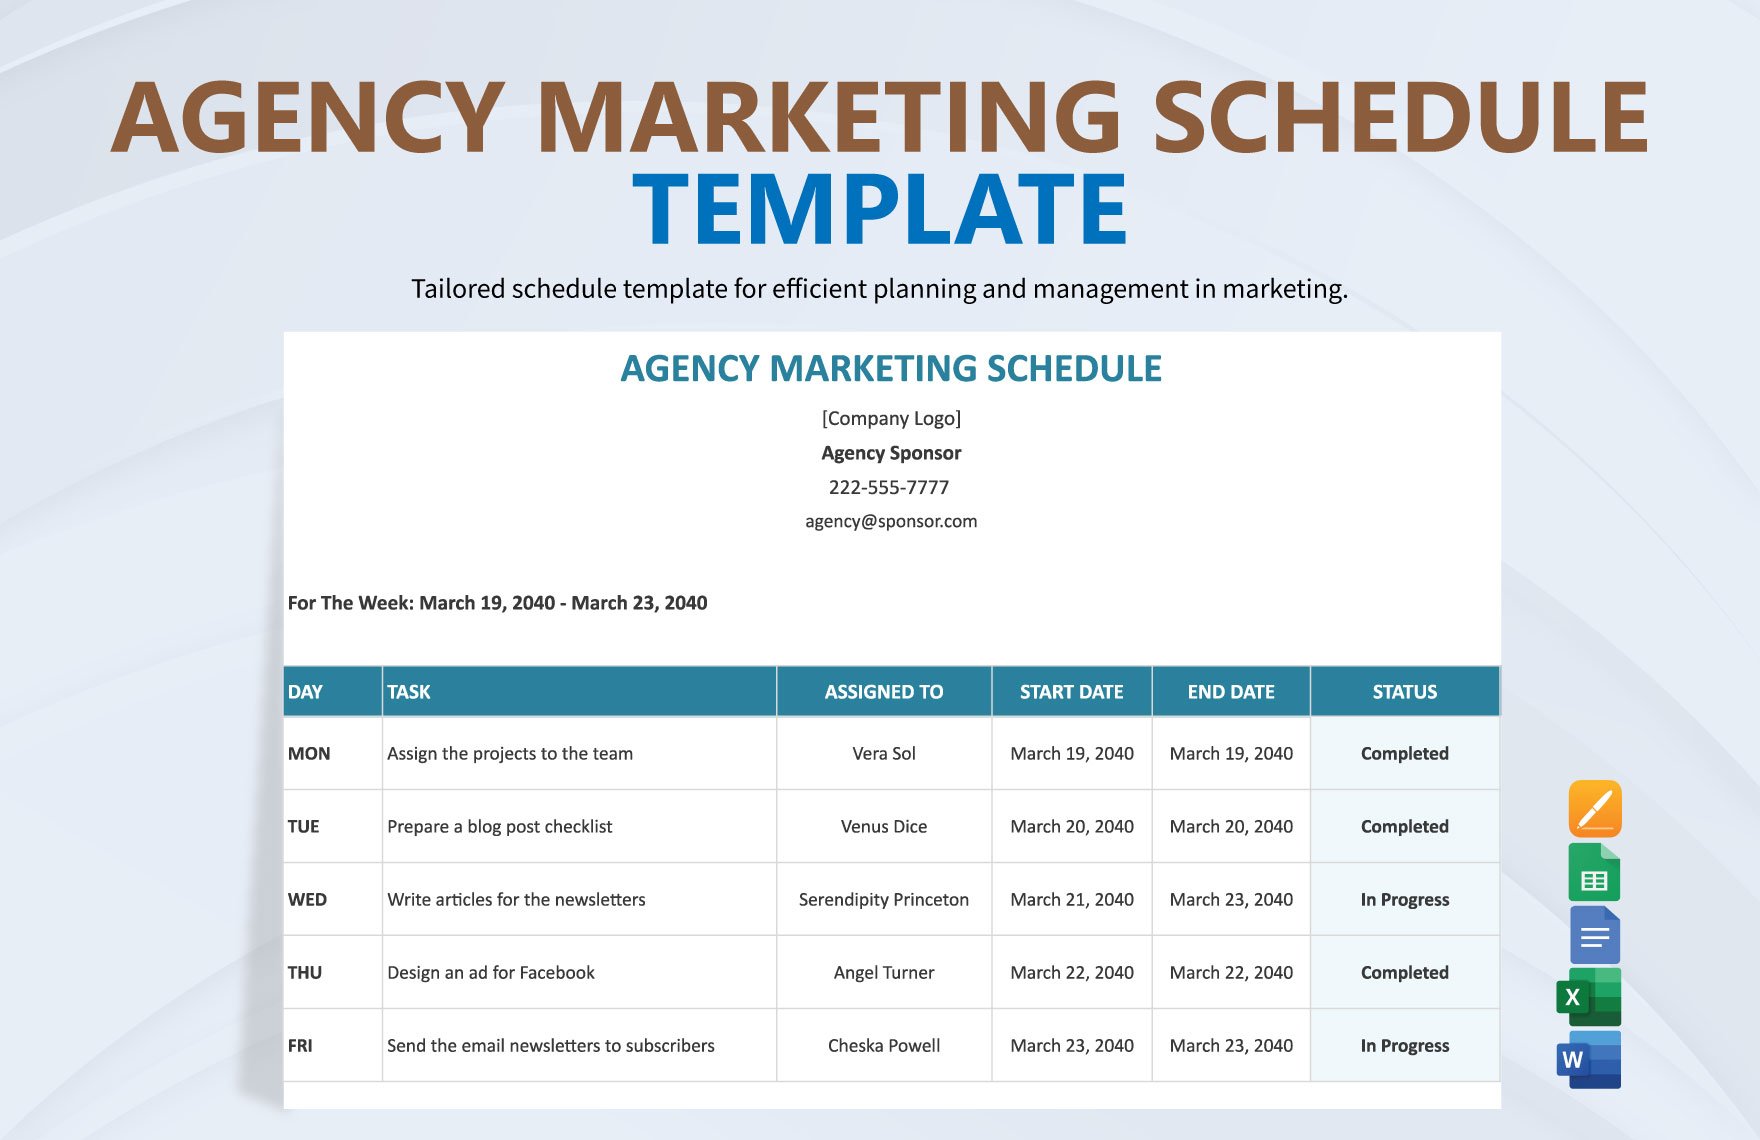 Free Agency Marketing Schedule Template in Word, Google Docs, Excel, Google Sheets, Apple Pages